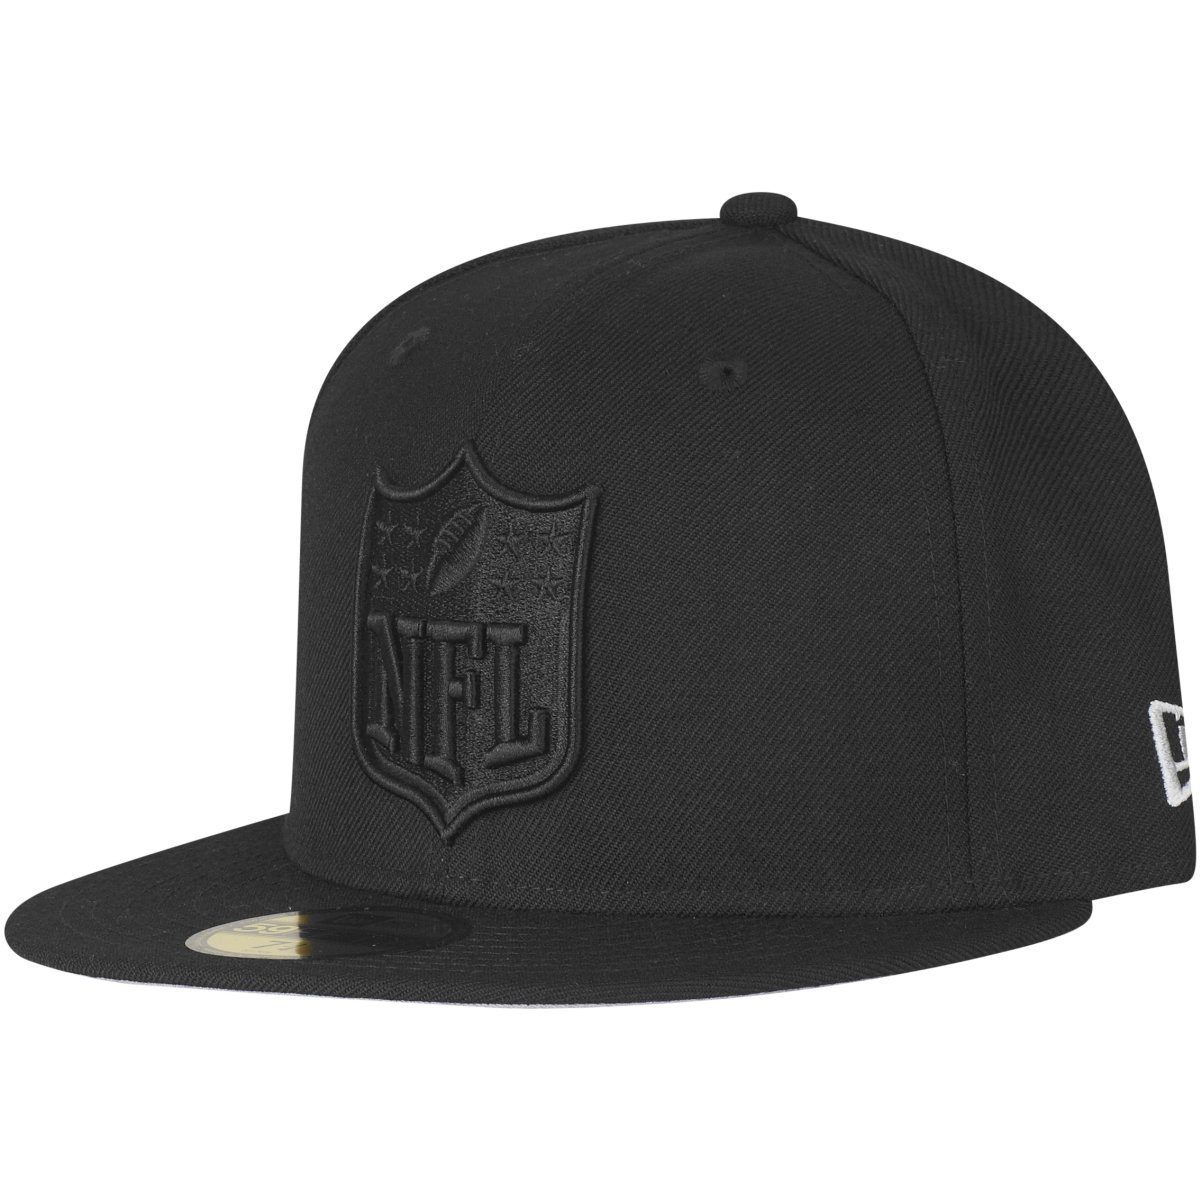 New Era Fitted Cap 59Fifty NFL SHIELD Logo